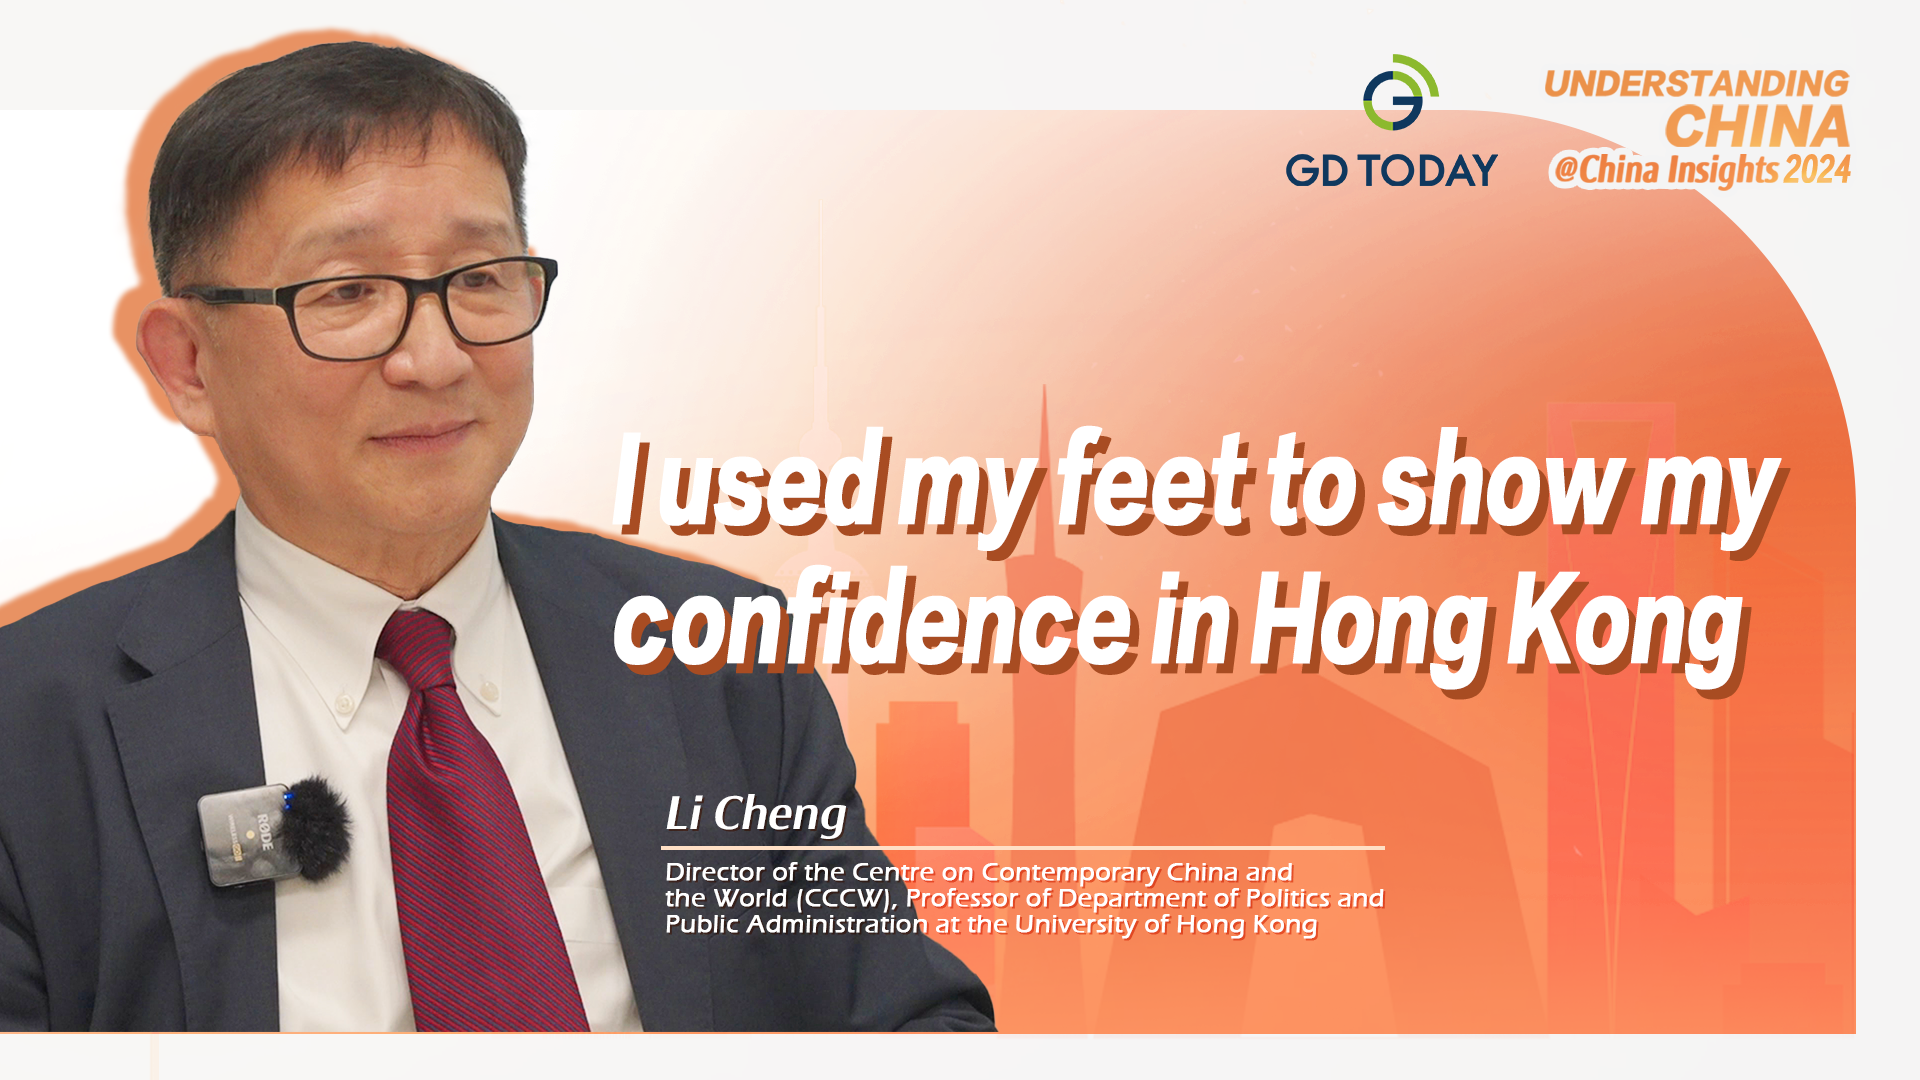 I used my feet to show my confidence in Hong Kong: high-profile scholar